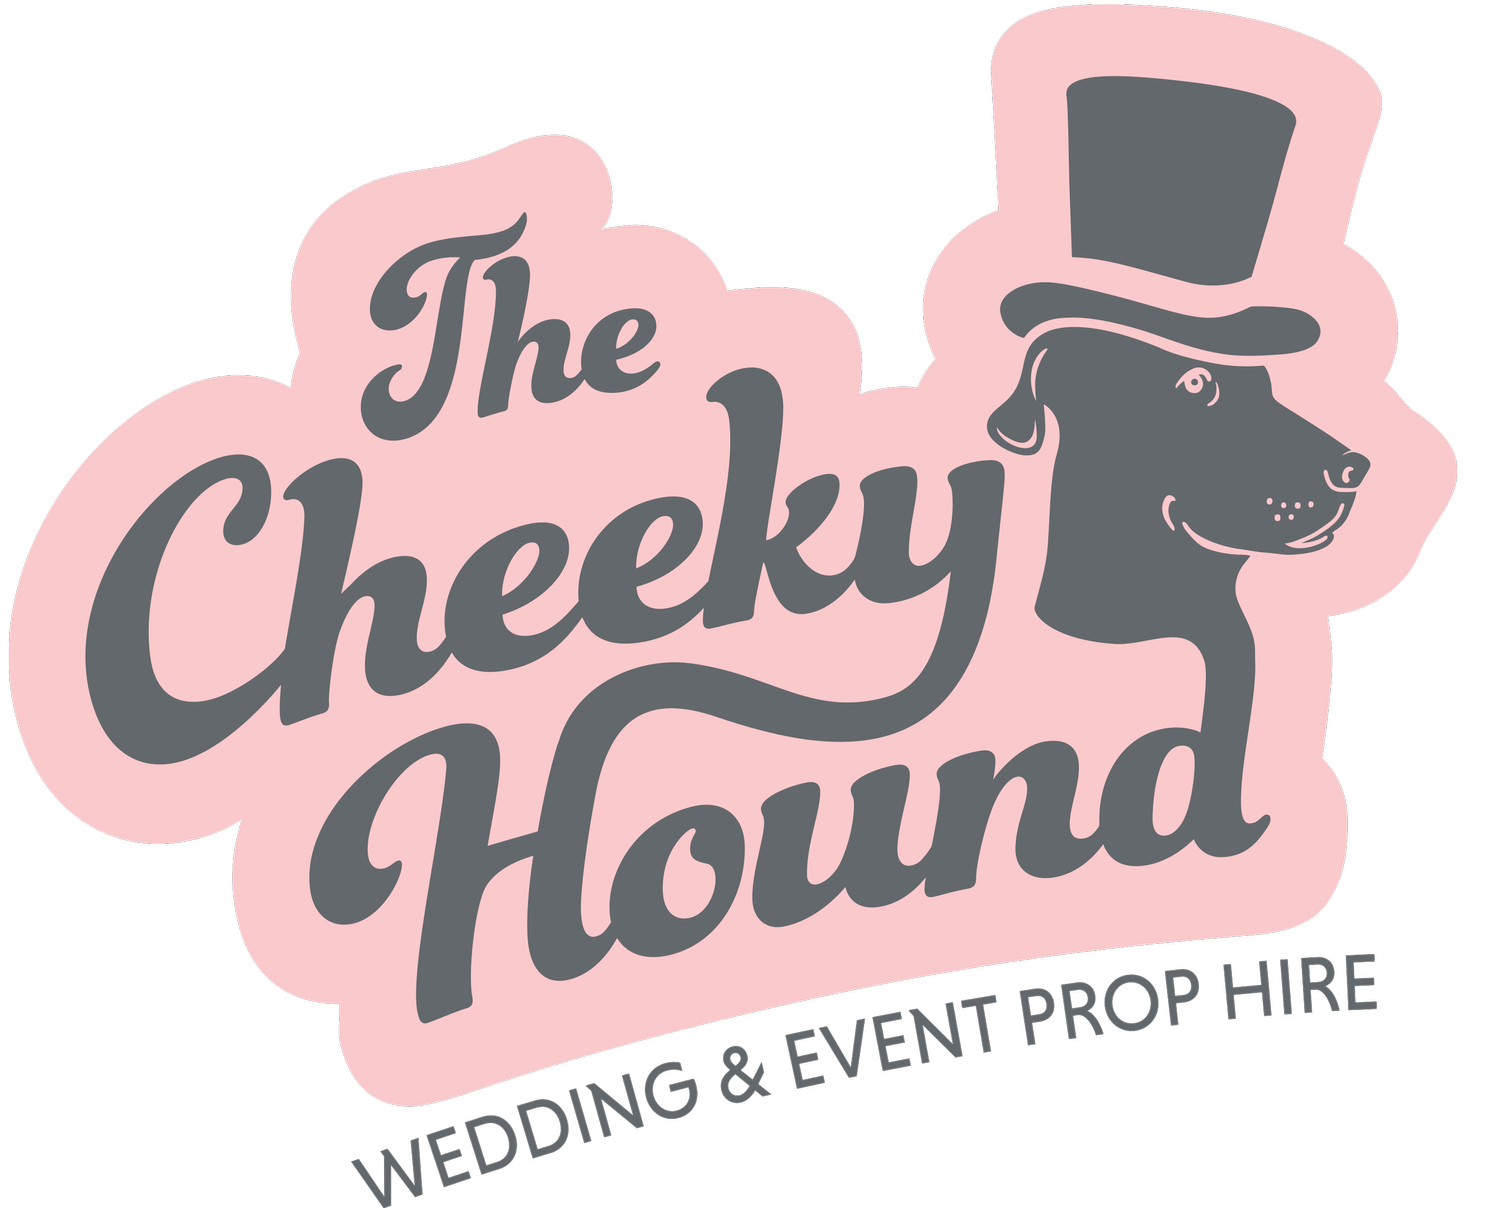 The Cheeky Hound Wedding &amp; Event Prop Hire